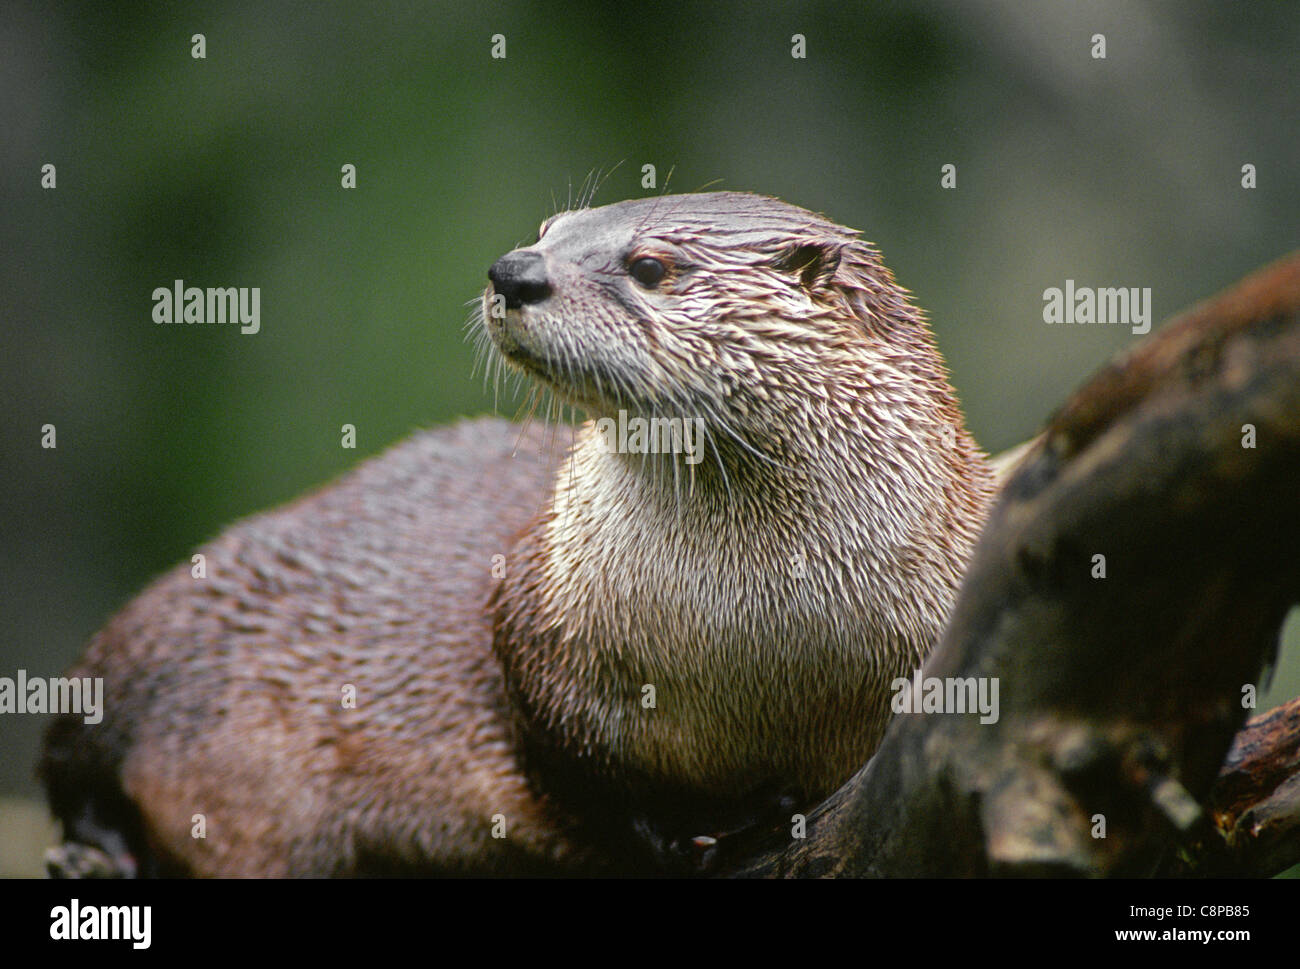 NORTH AMERICAN RIVER OTTER (Lutra canadensis), western Washington, USA Stock Photo